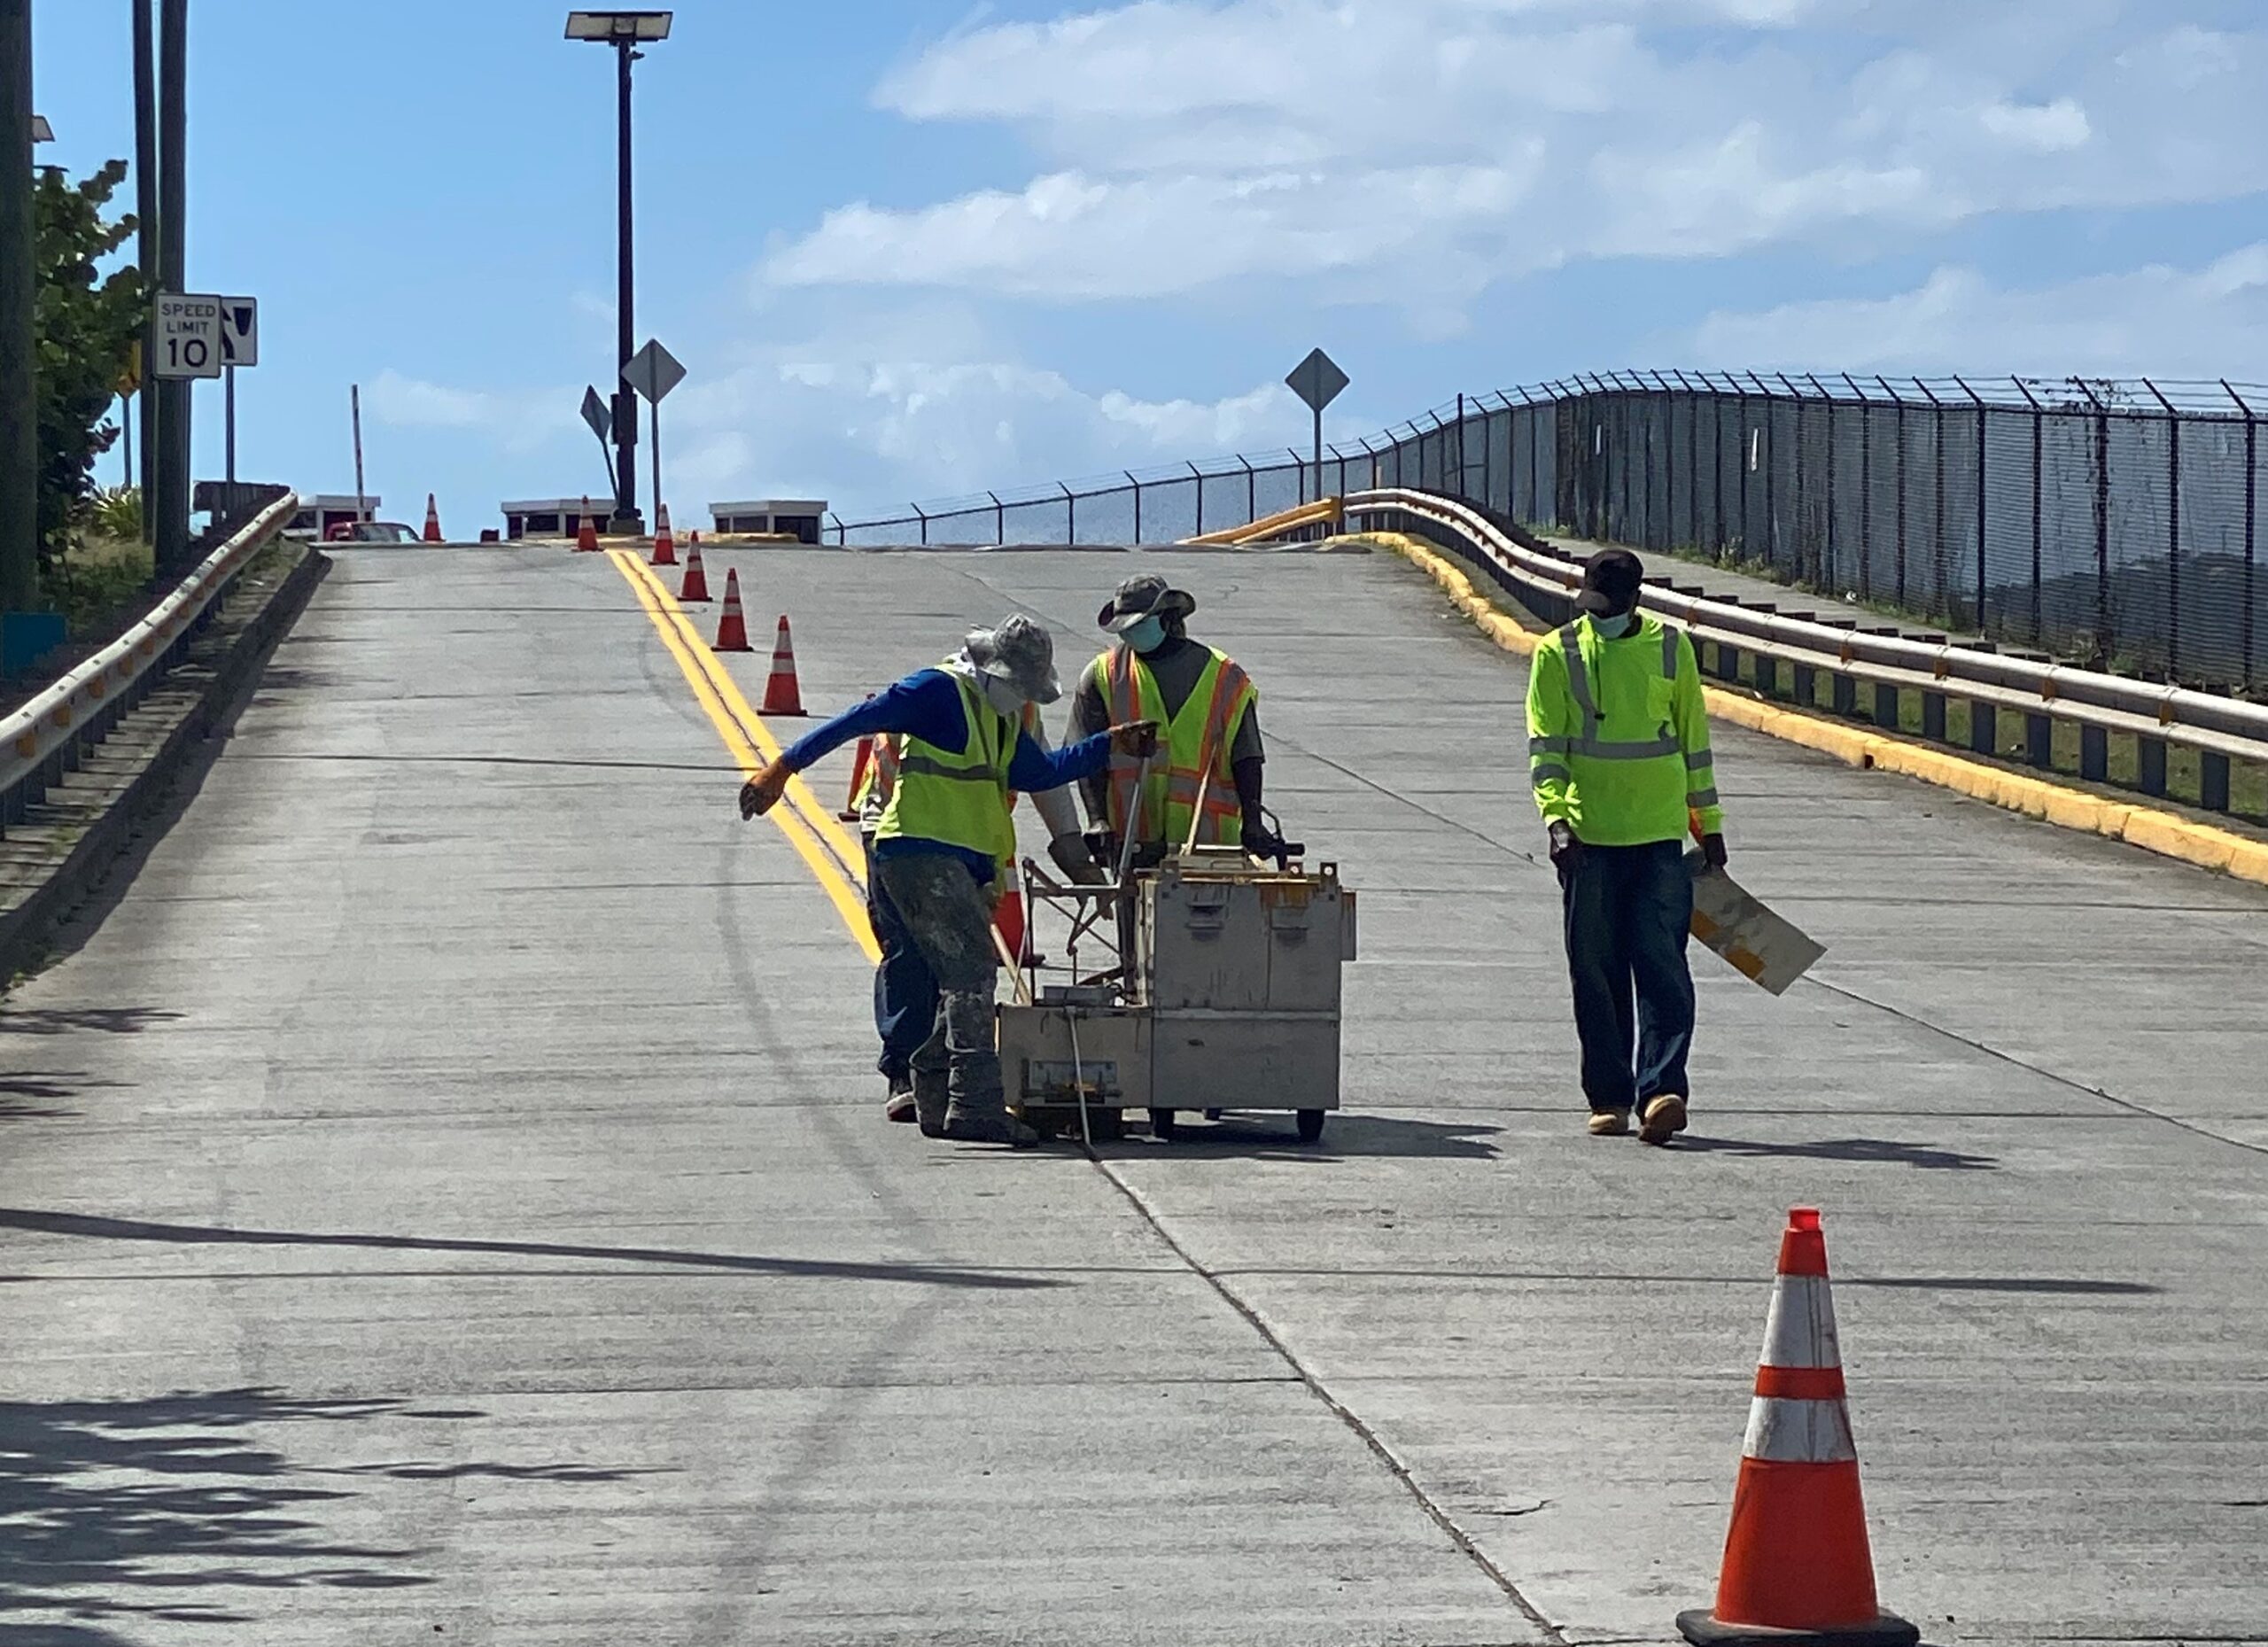 Road Striping Work Continues On Airport Road In St. Thomas, DPW Says